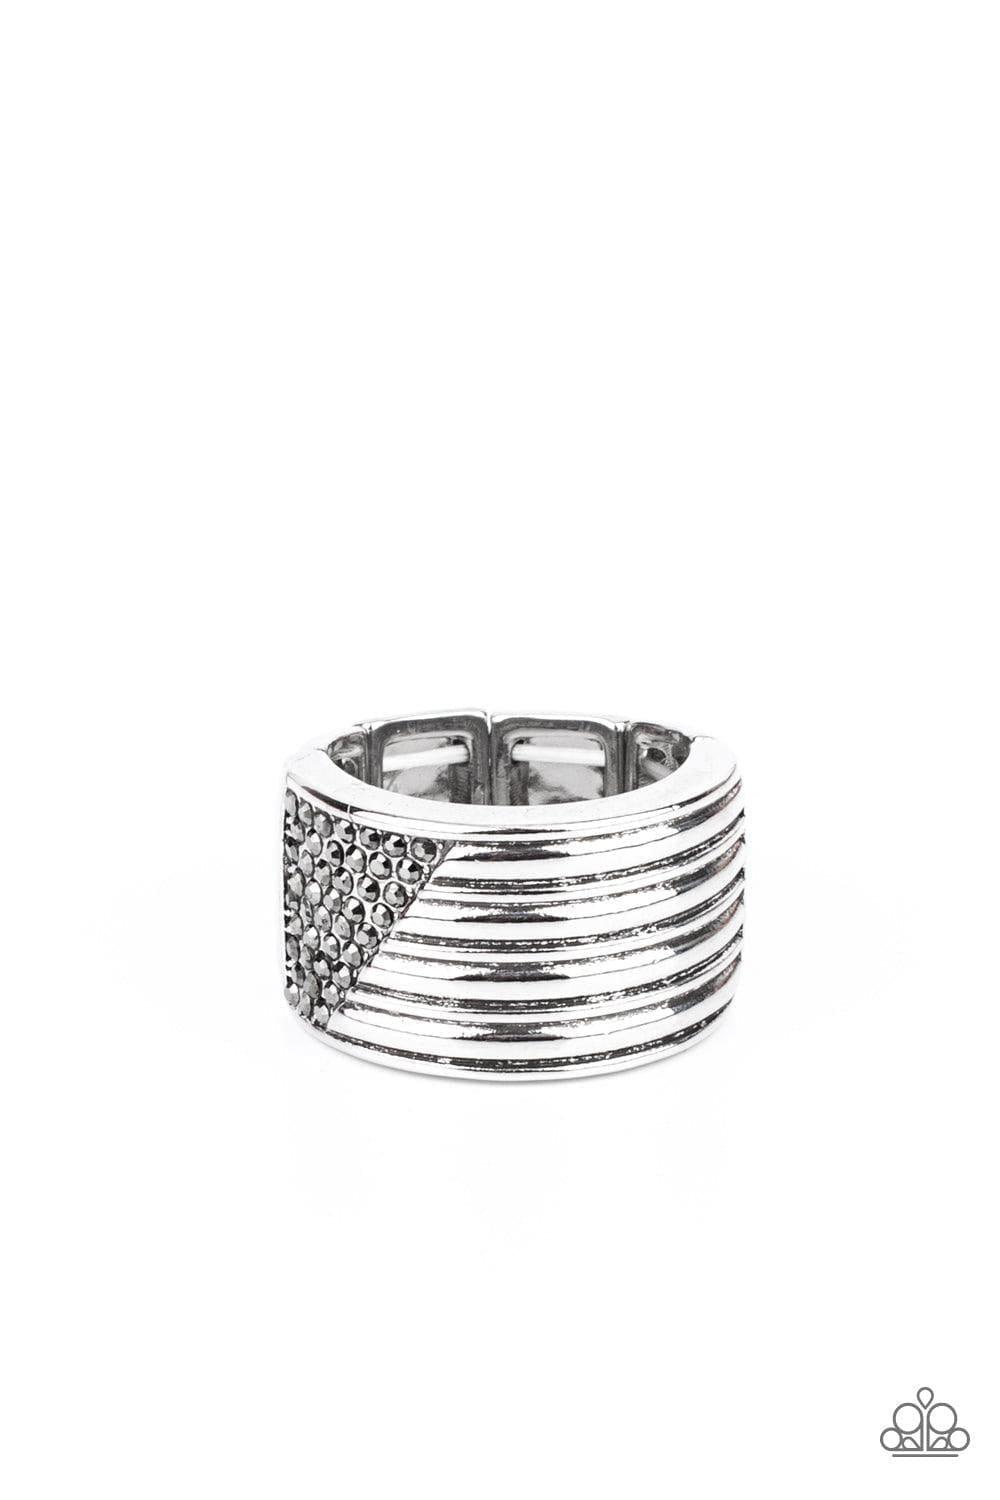 Paparazzi Accessories - Legendary Lineup - Silver Ring - Bling by JessieK